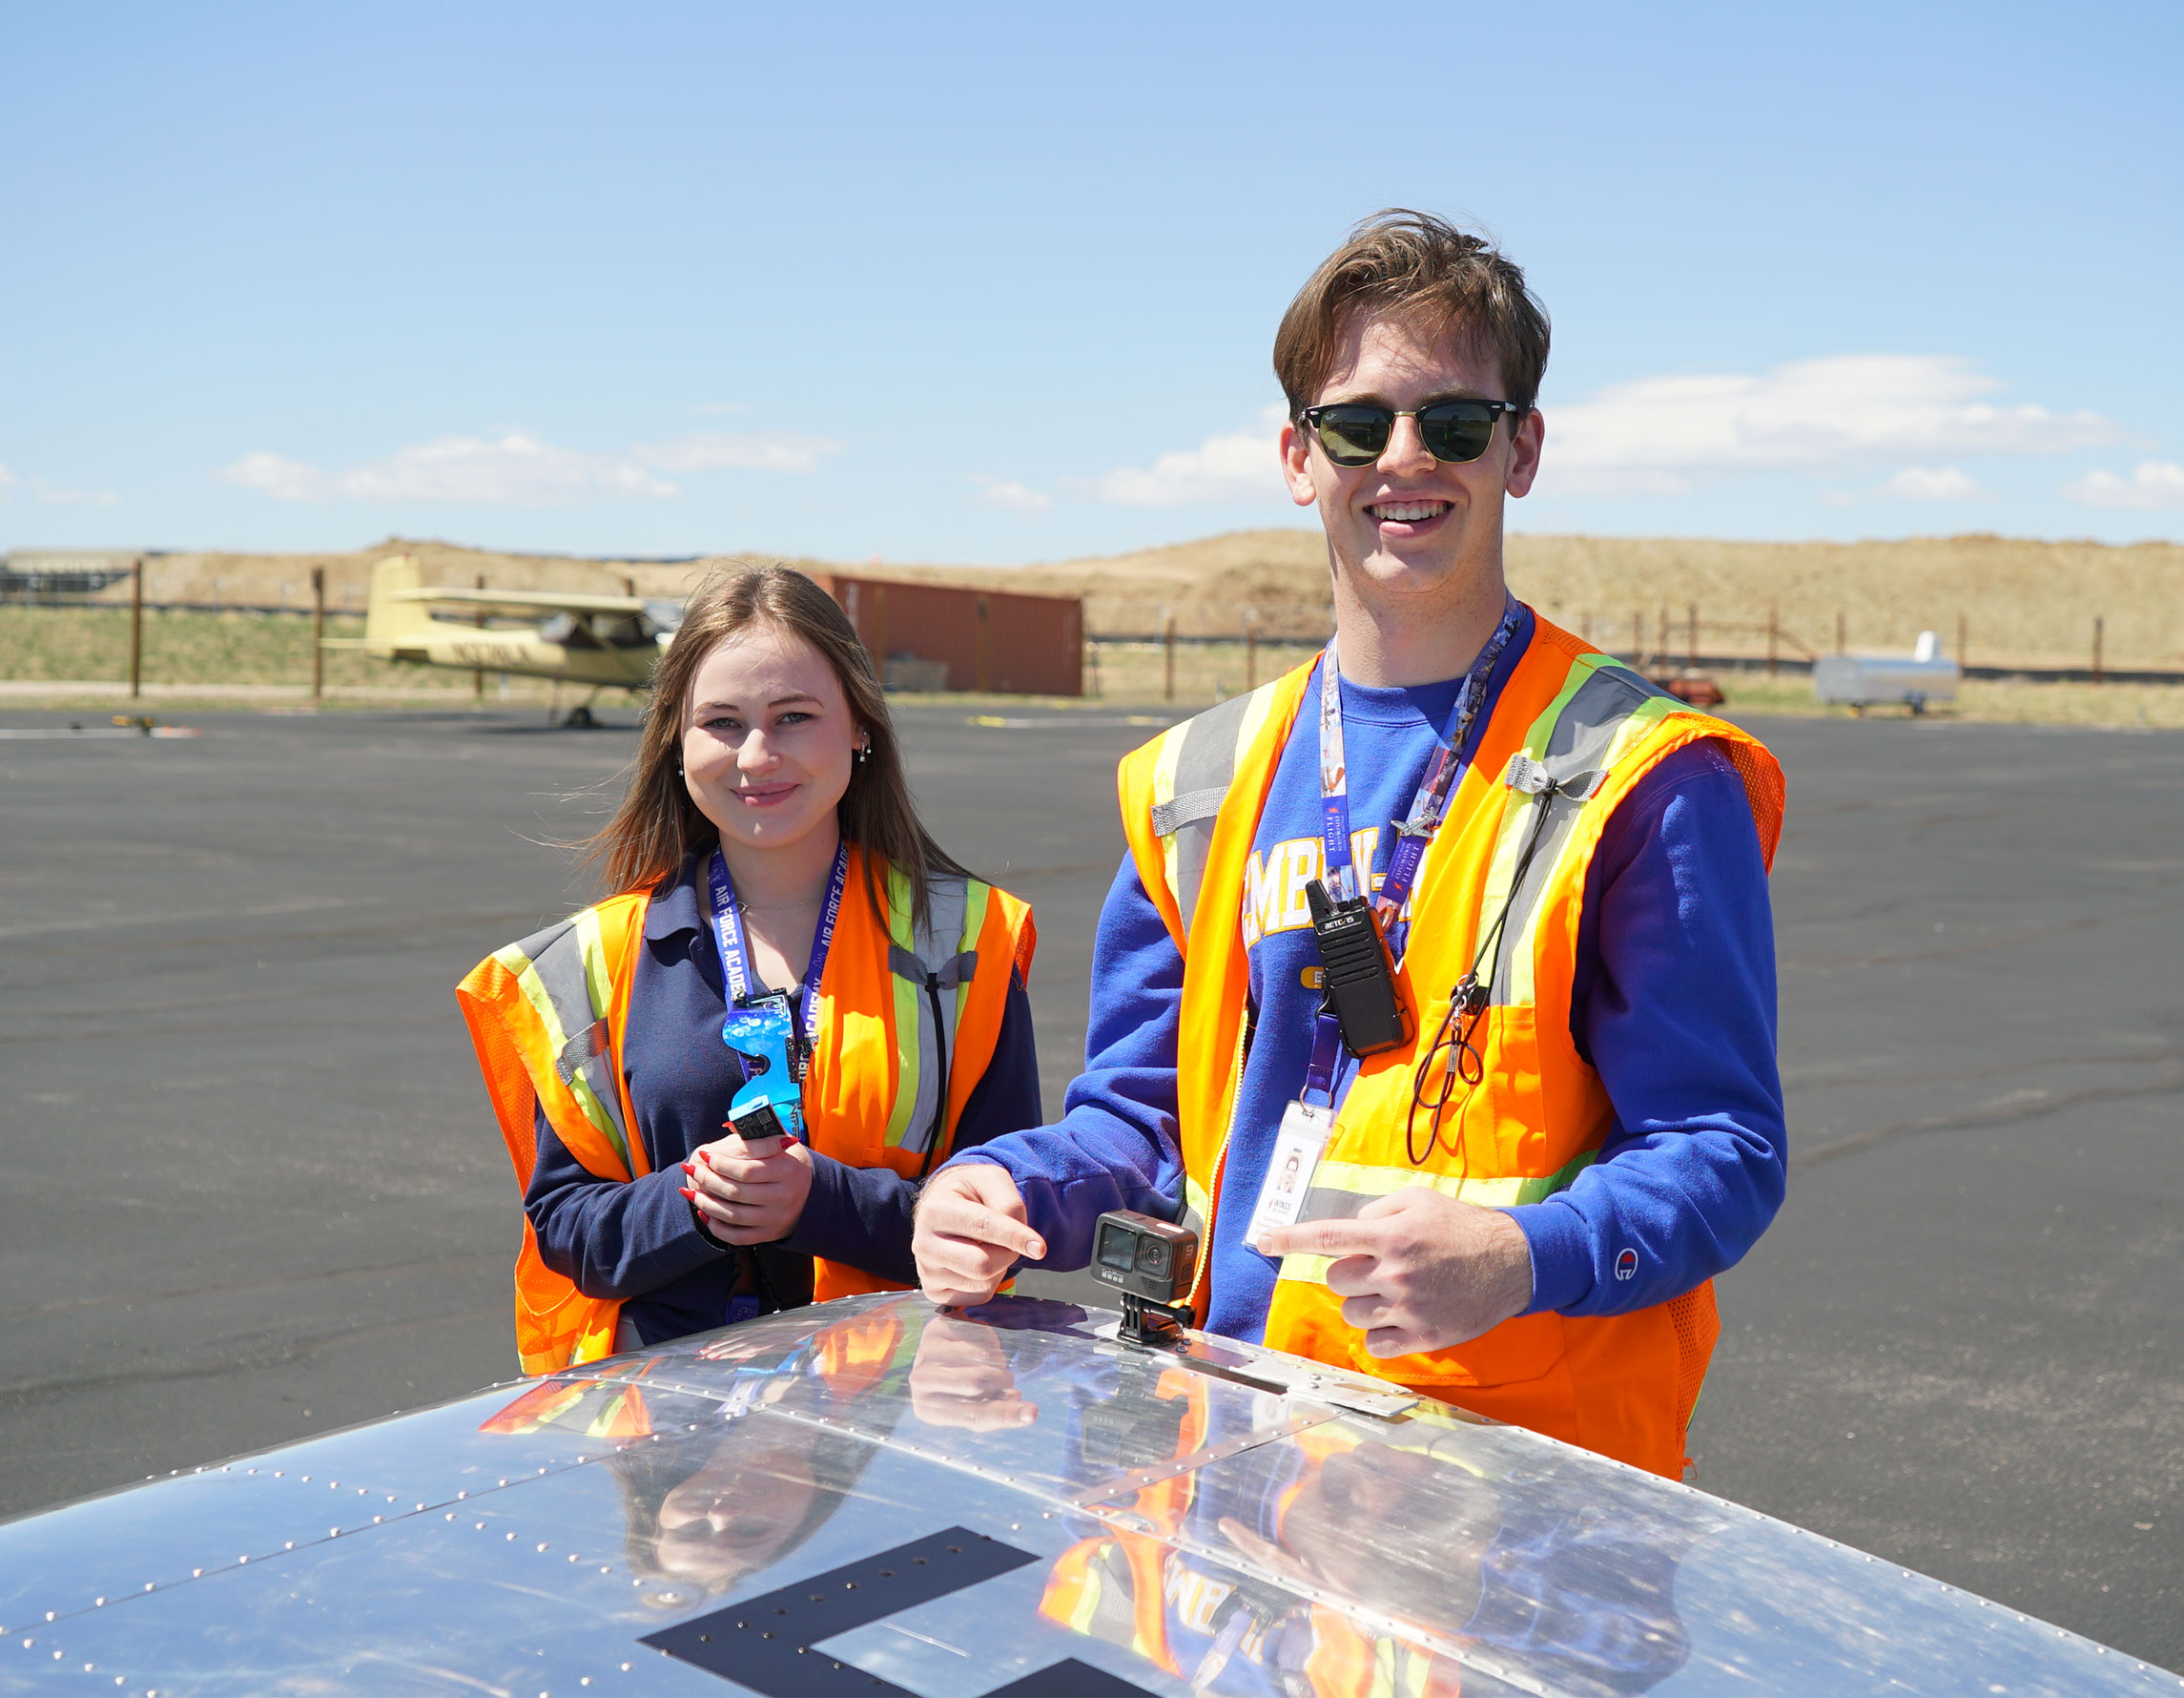 Students smiling on the ramp at Exploration of Flight